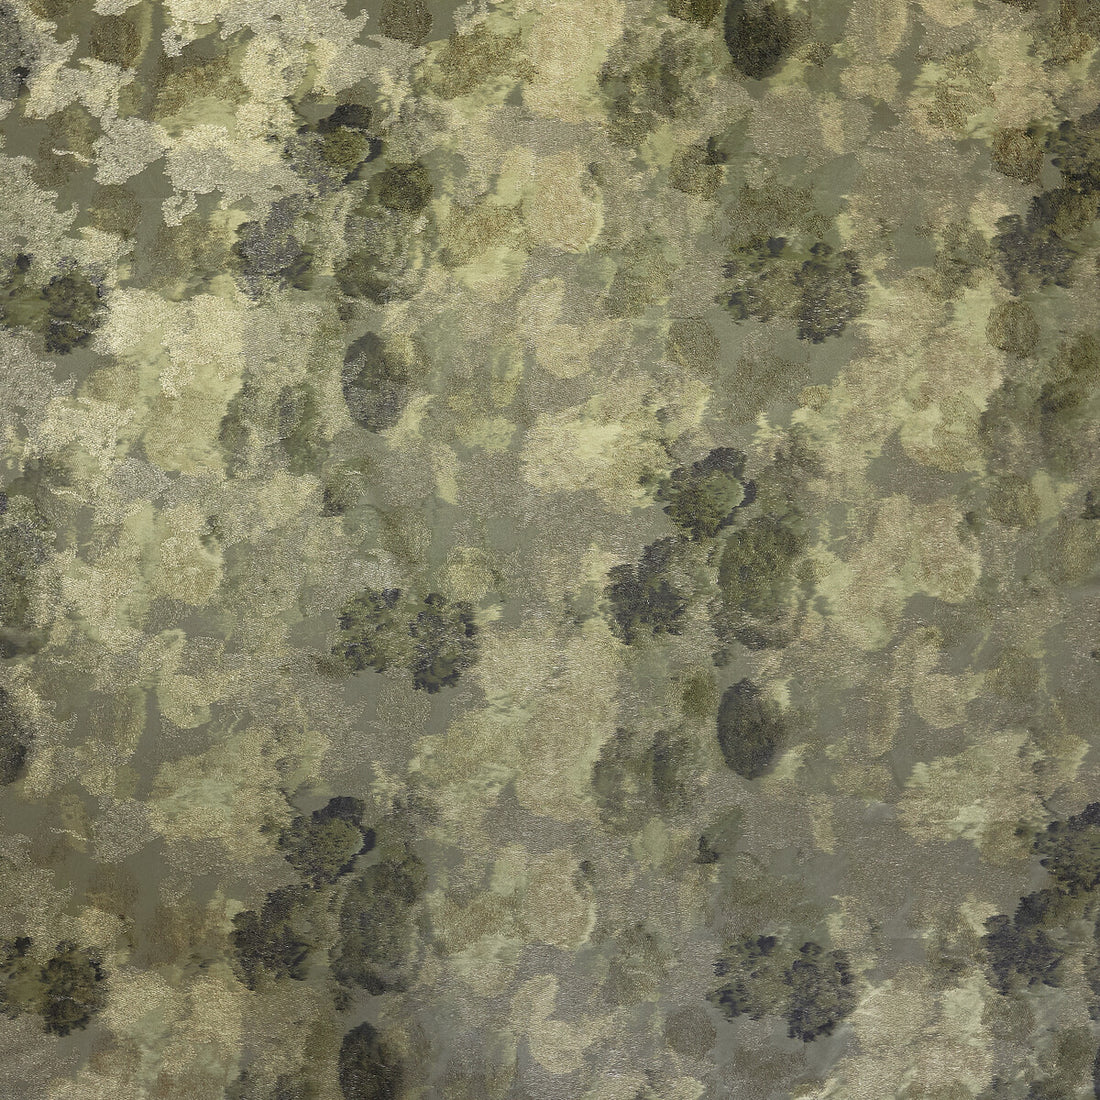 Folie fabric in 1 color - pattern LZ-30210.01.0 - by Kravet Design in the Lizzo collection